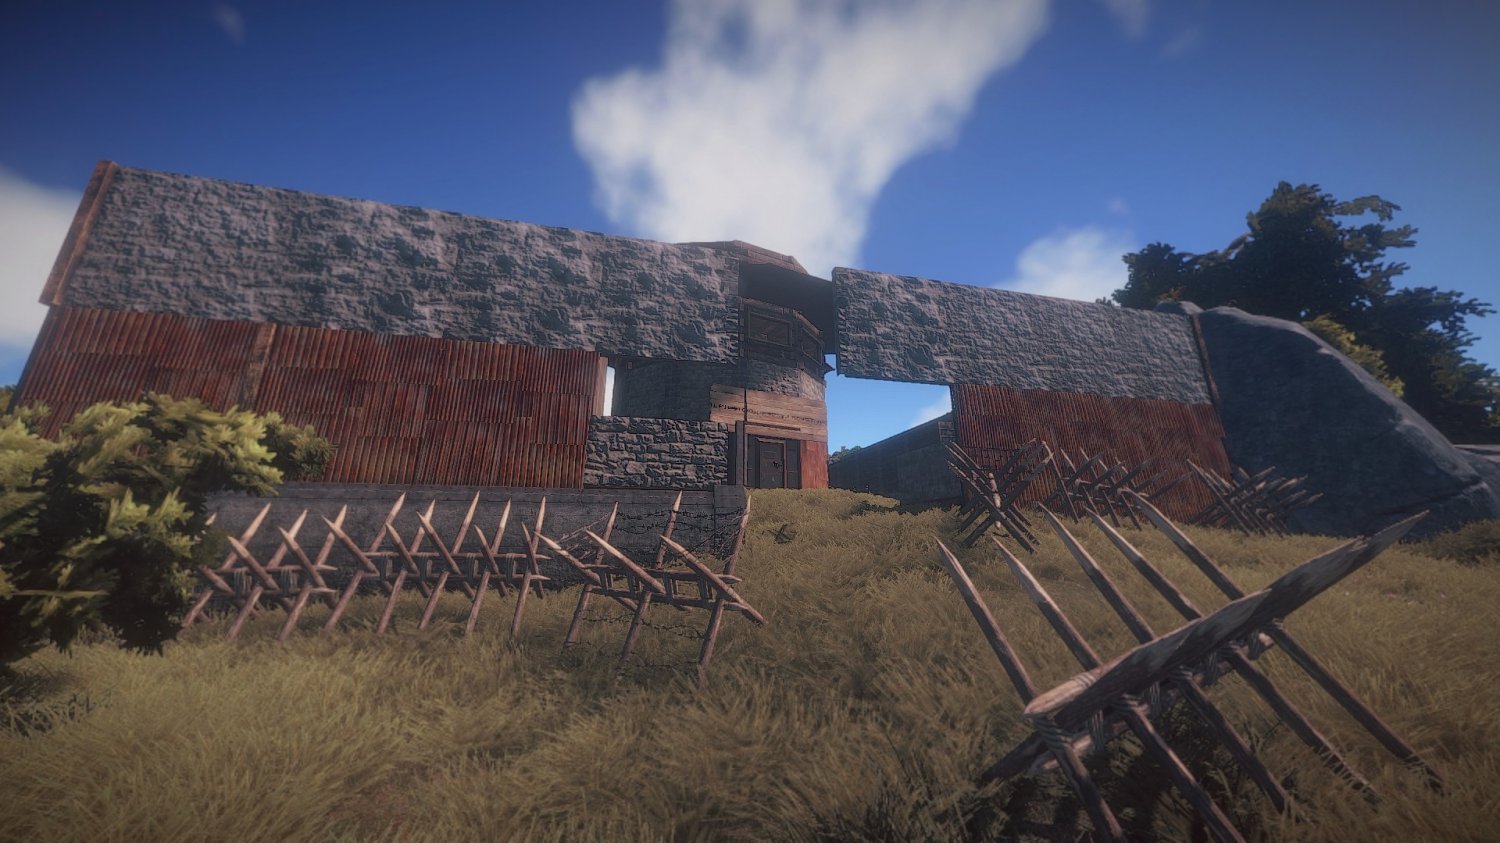 rust game download free full version for pc